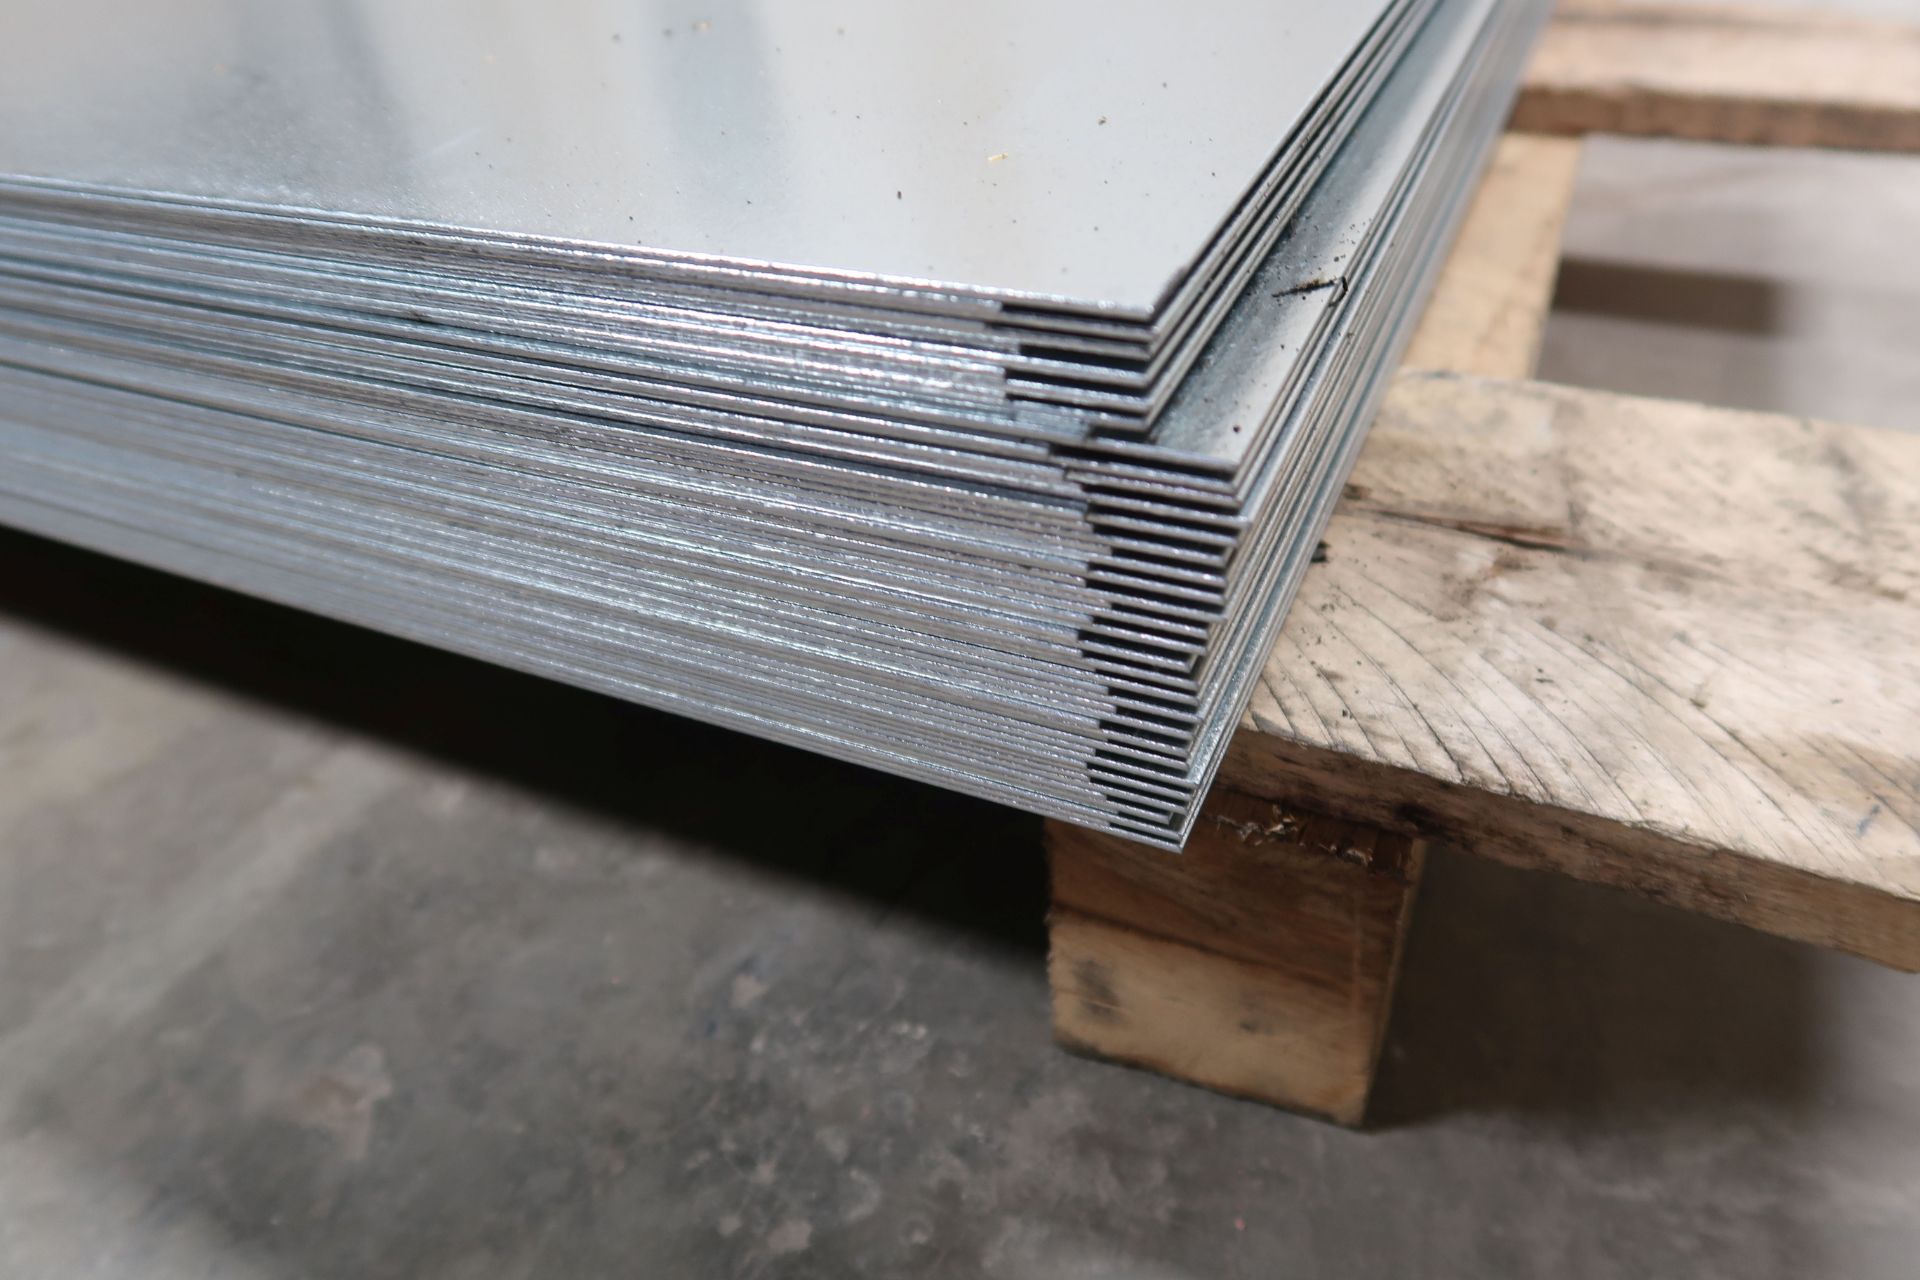 (LOT) (120) PIECES 16 GA. X 23-1/2" X 36" GALVANIZED SHEETS - Image 4 of 5